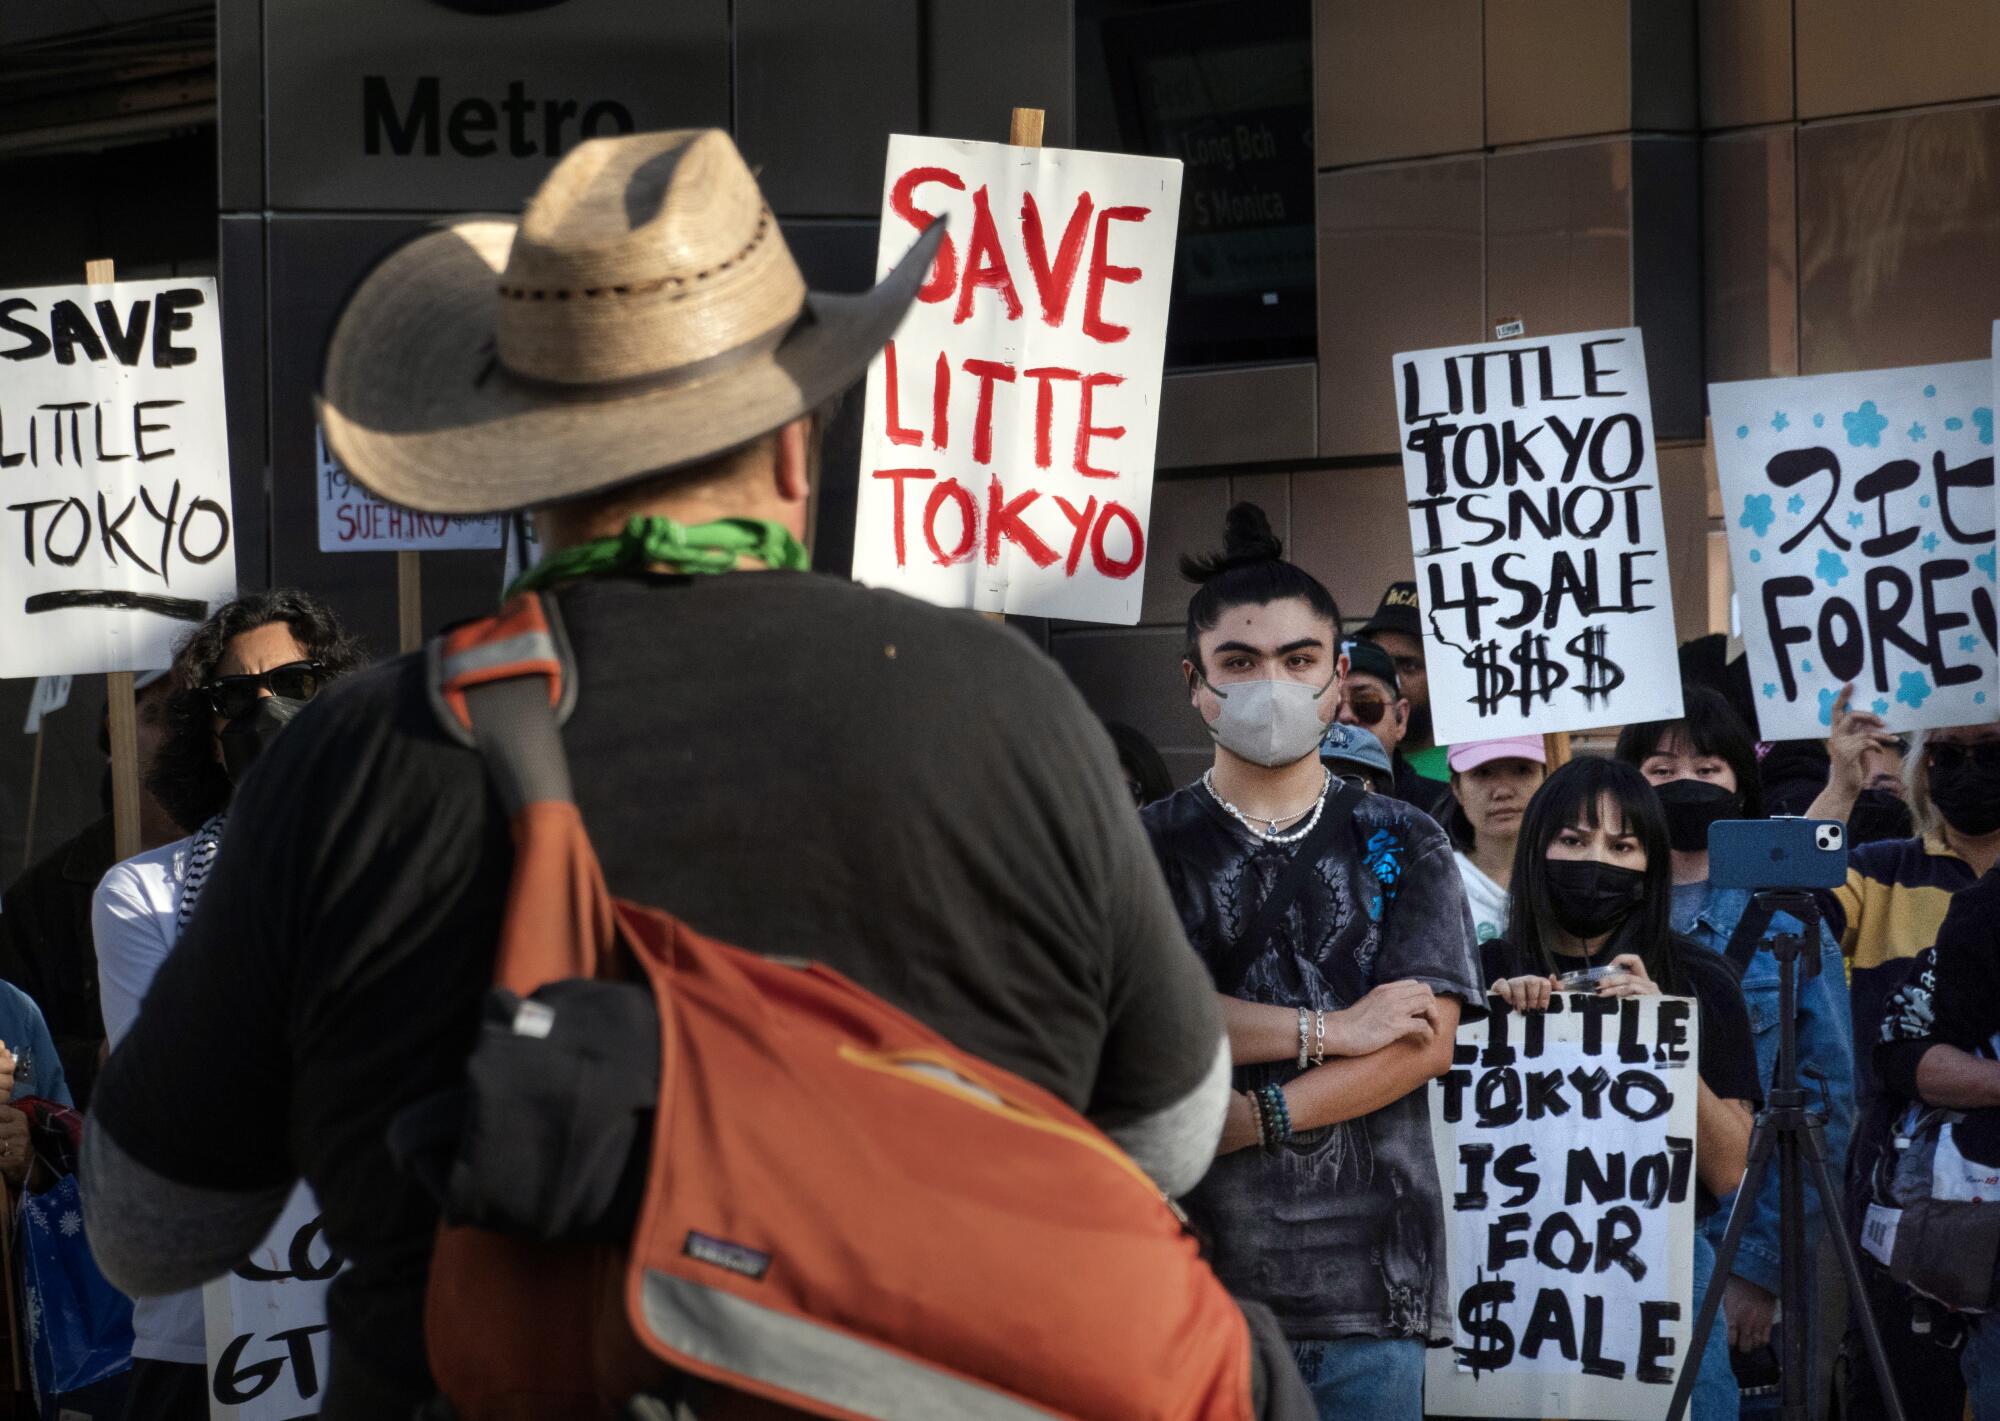 A rally with signs seeking to save Little Tokyo protest the eviction of Suehiro Café.